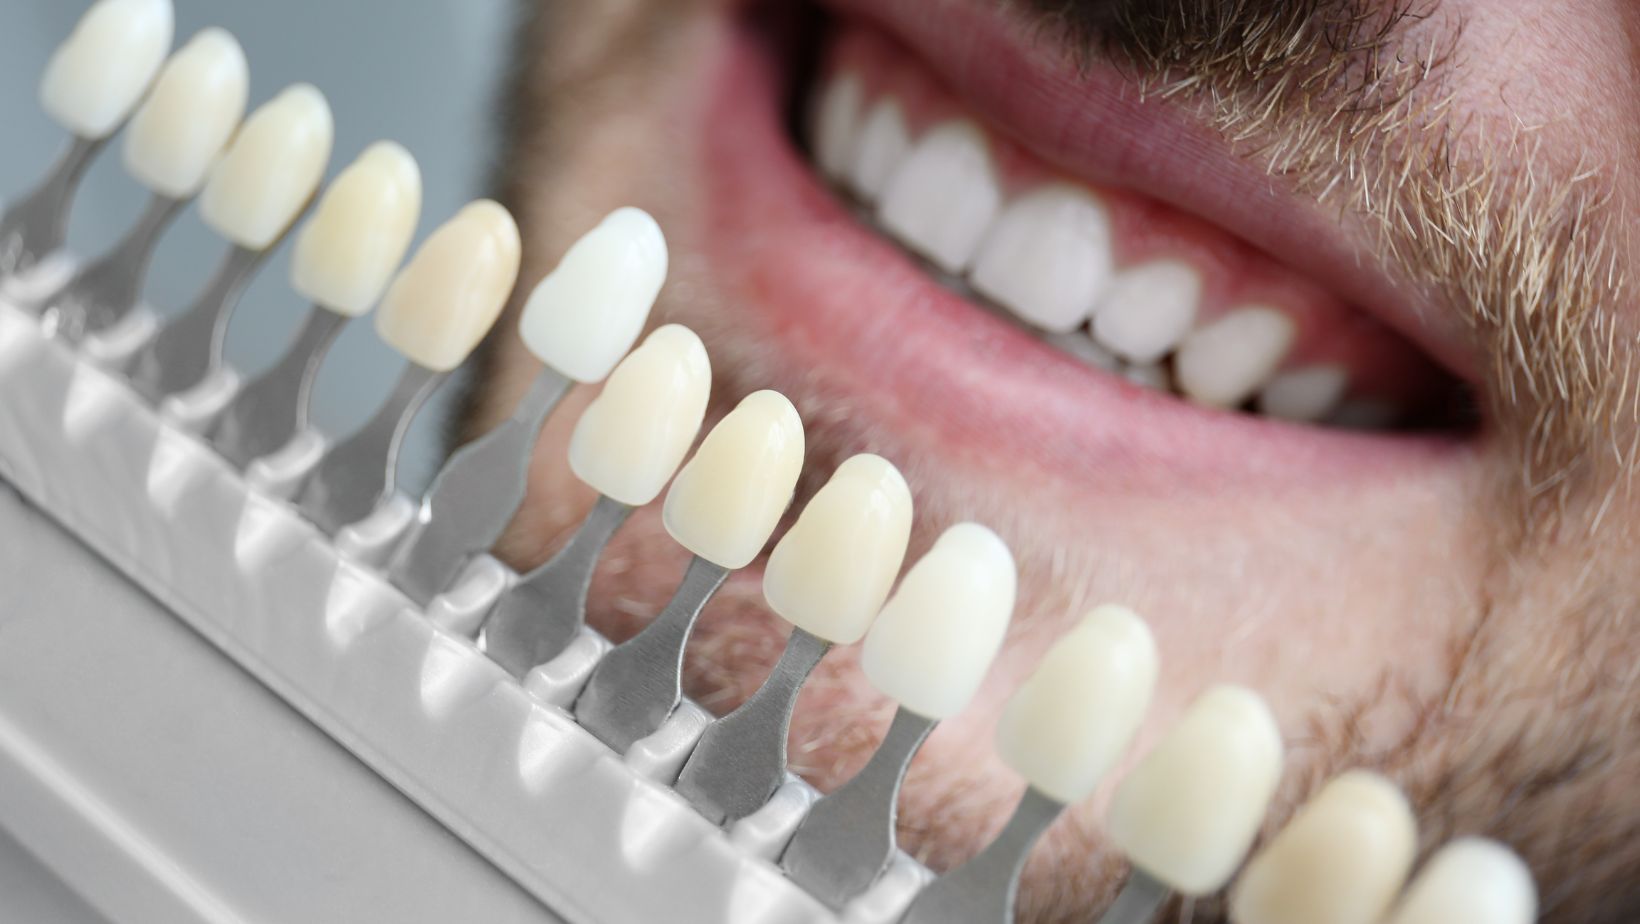 which of the following statements is correct concerning porcelain veneers?